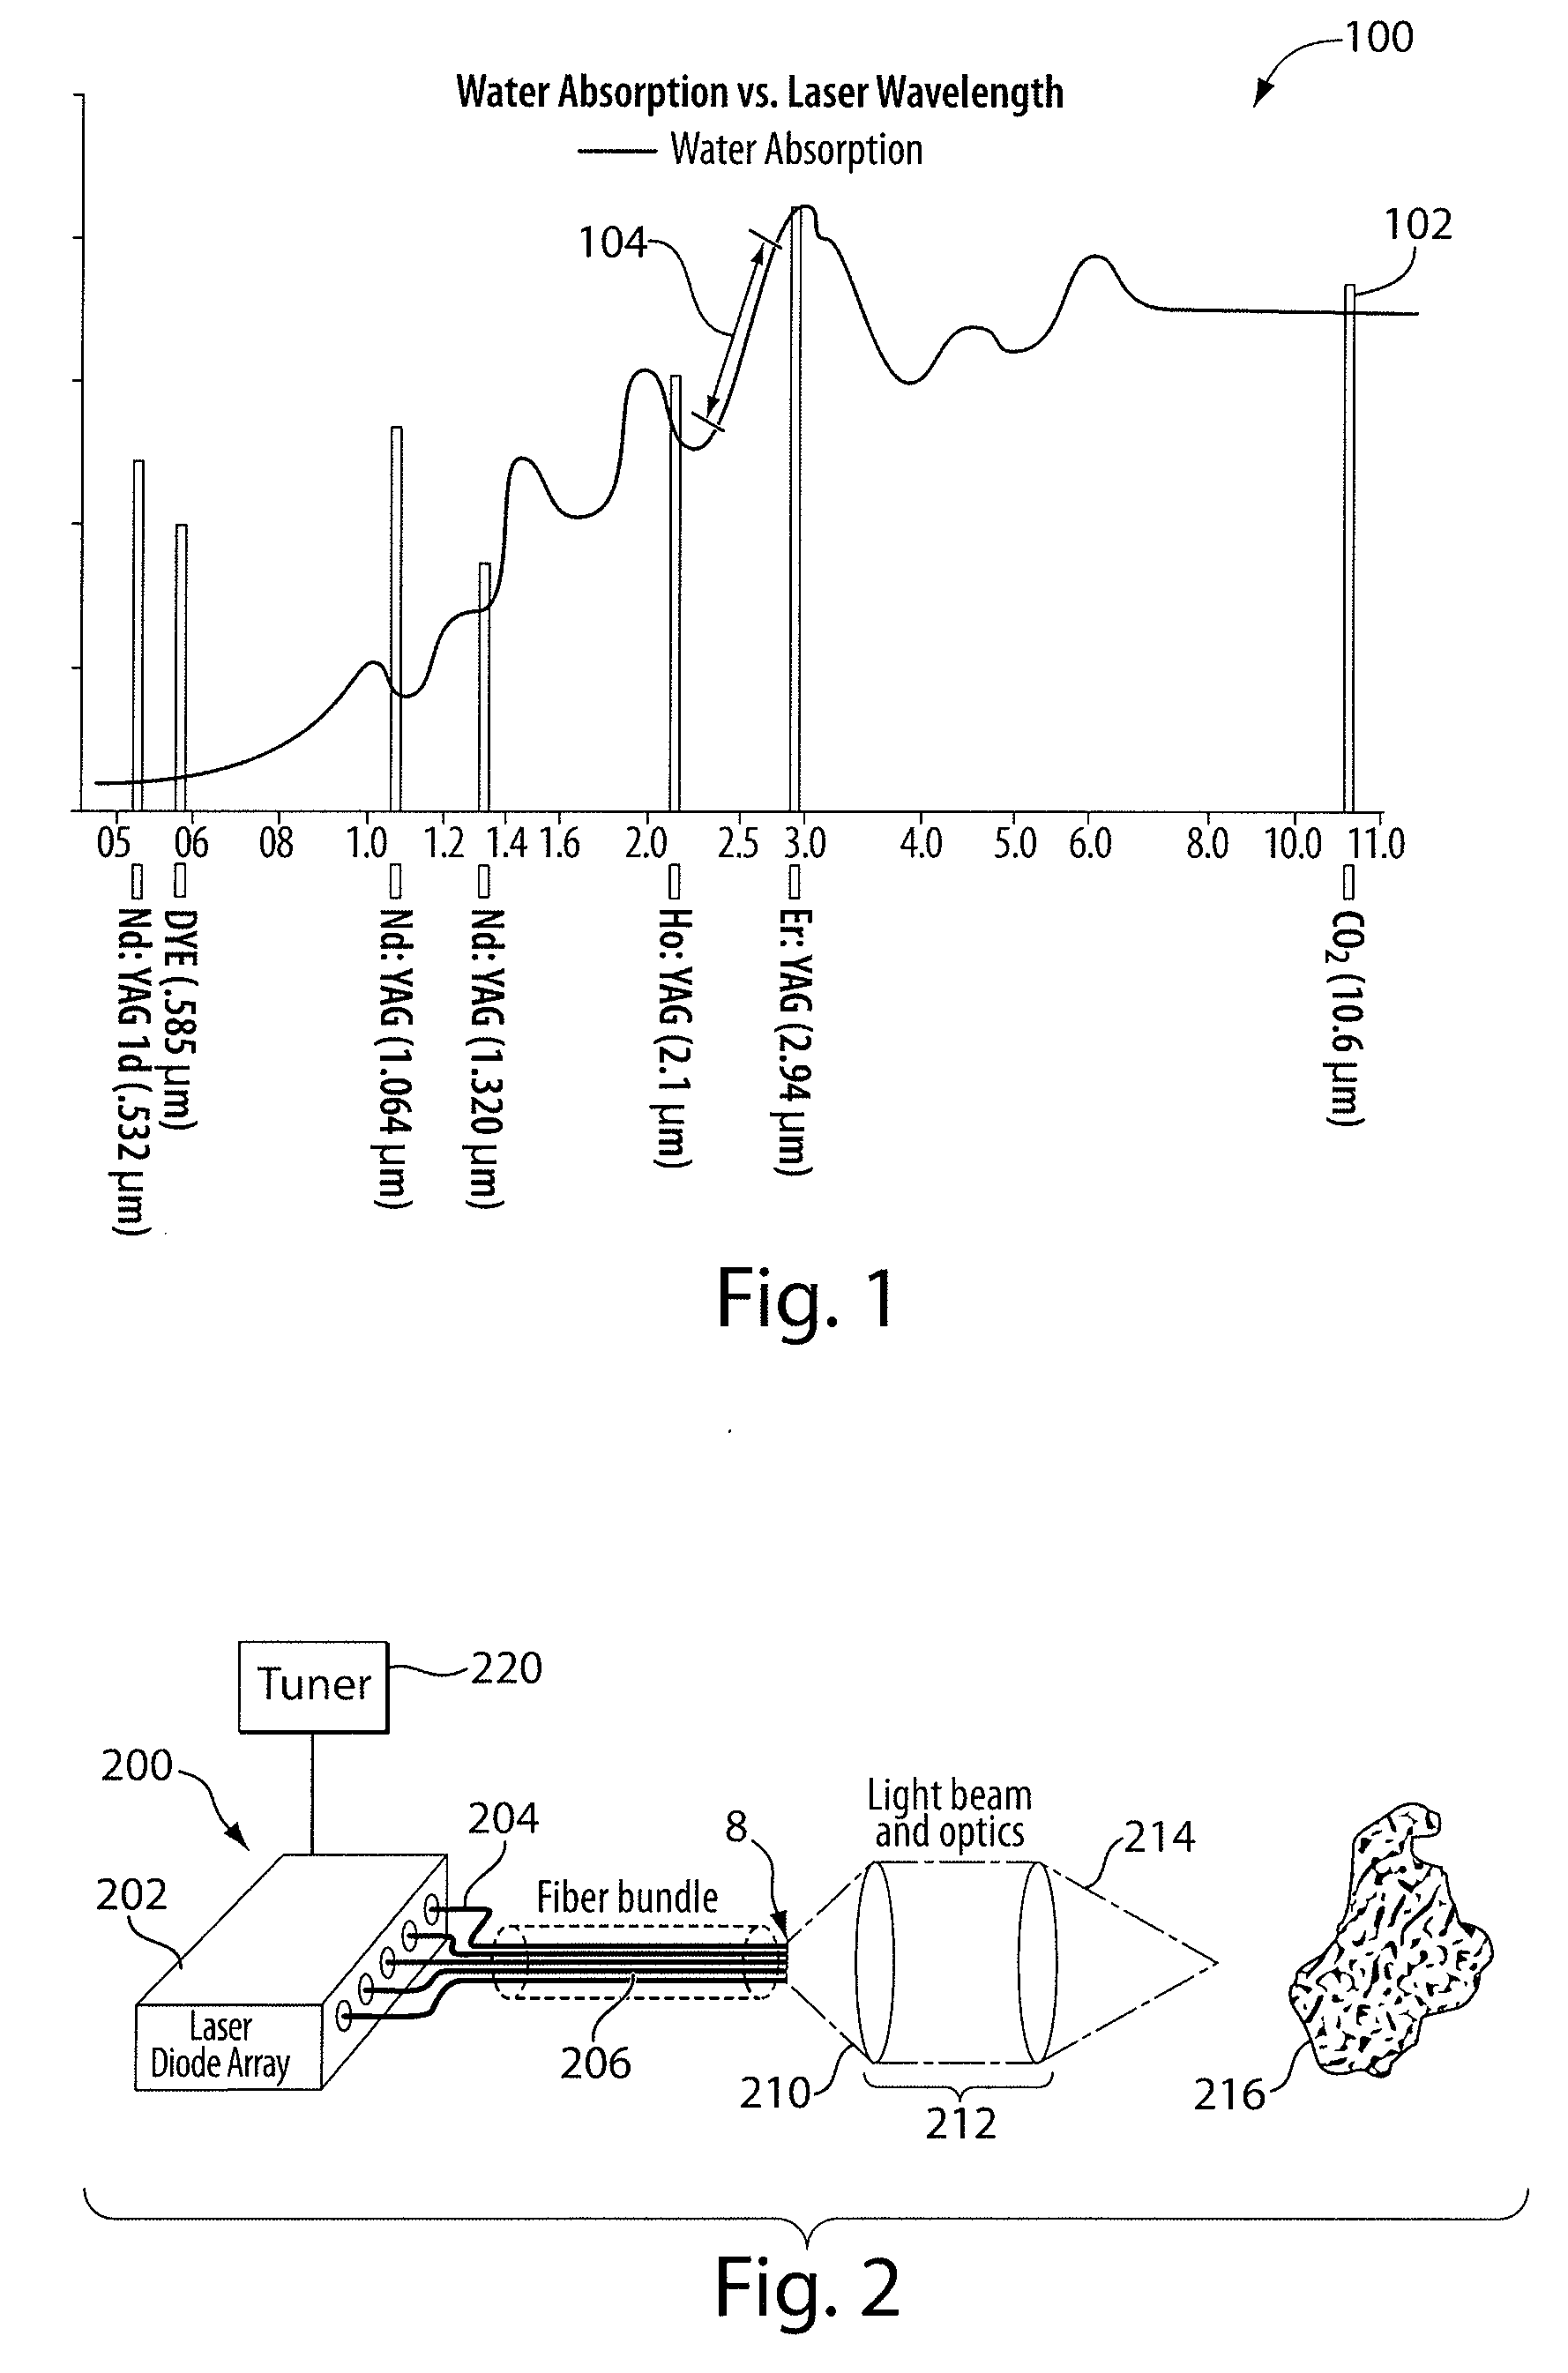 System and Method for Lasers in Surgical Applications